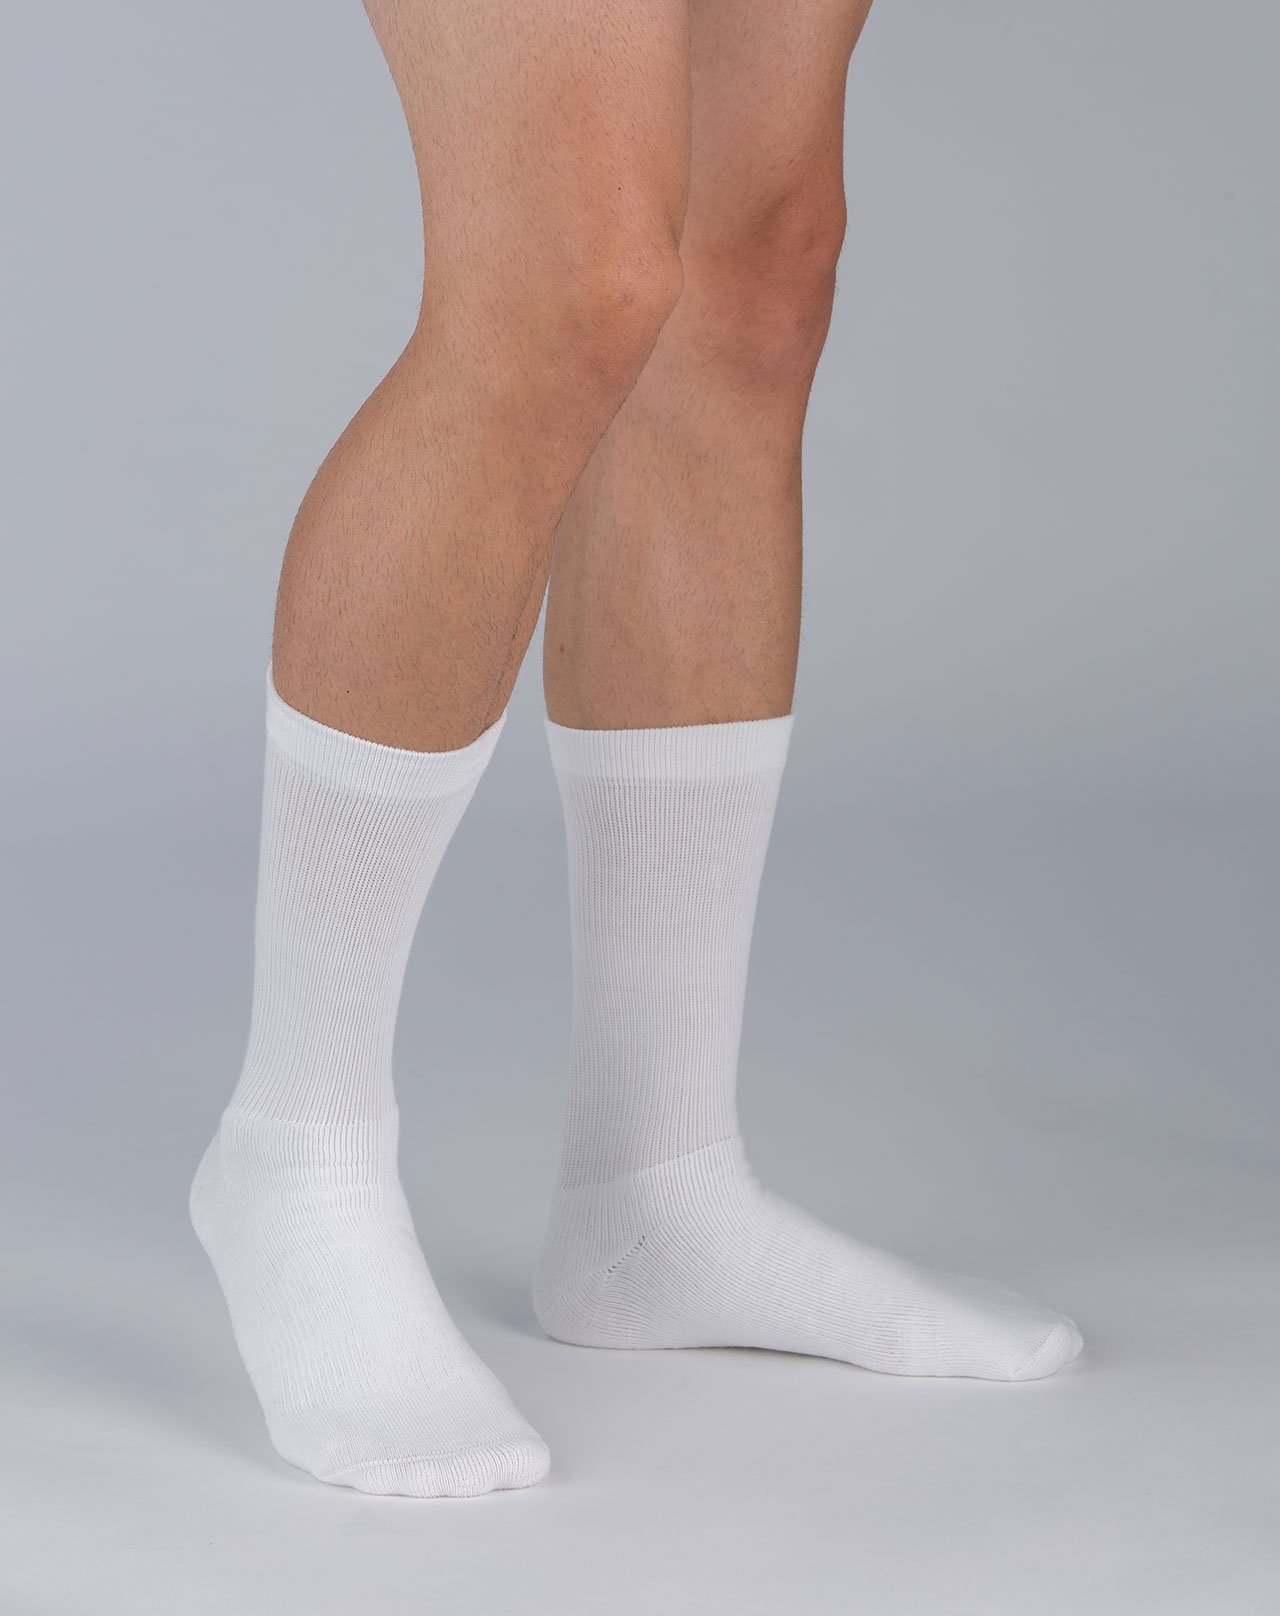 Elastic Slip-On Calf Support - Everfit Healthcare Australia Largest  Equipment SuperStore! Quality and Savings!